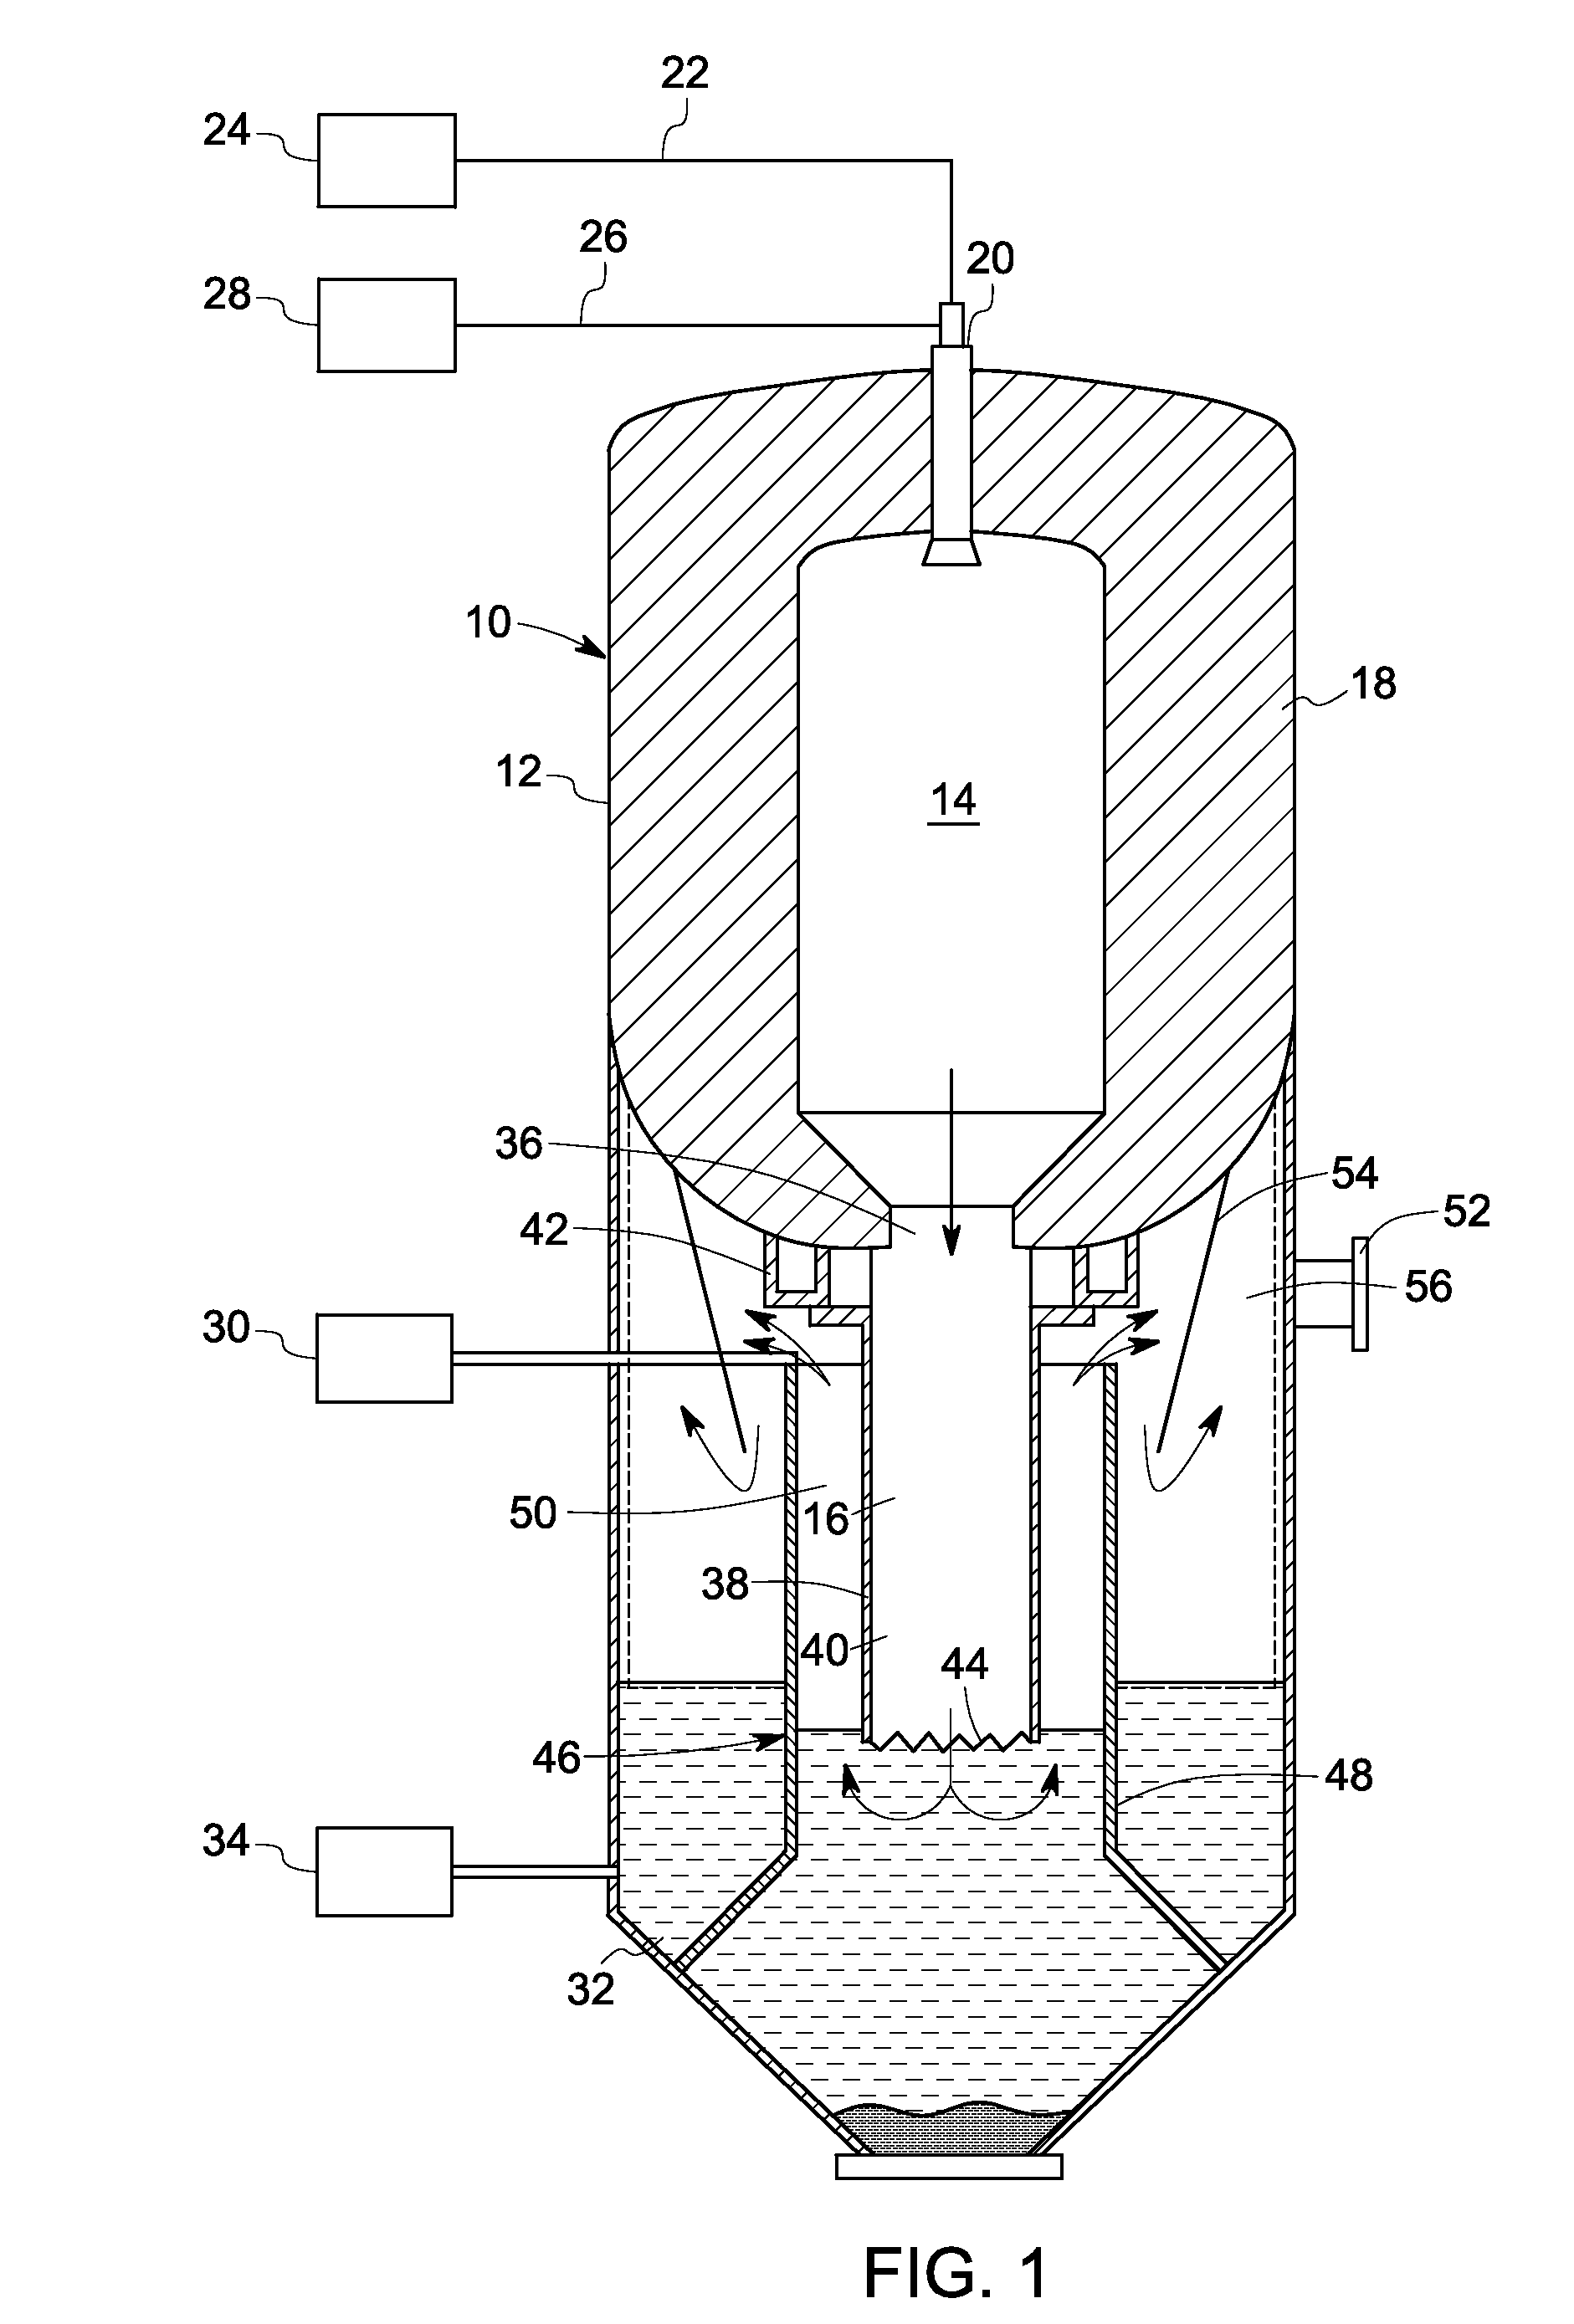 Quench chamber assembly for a gasifier